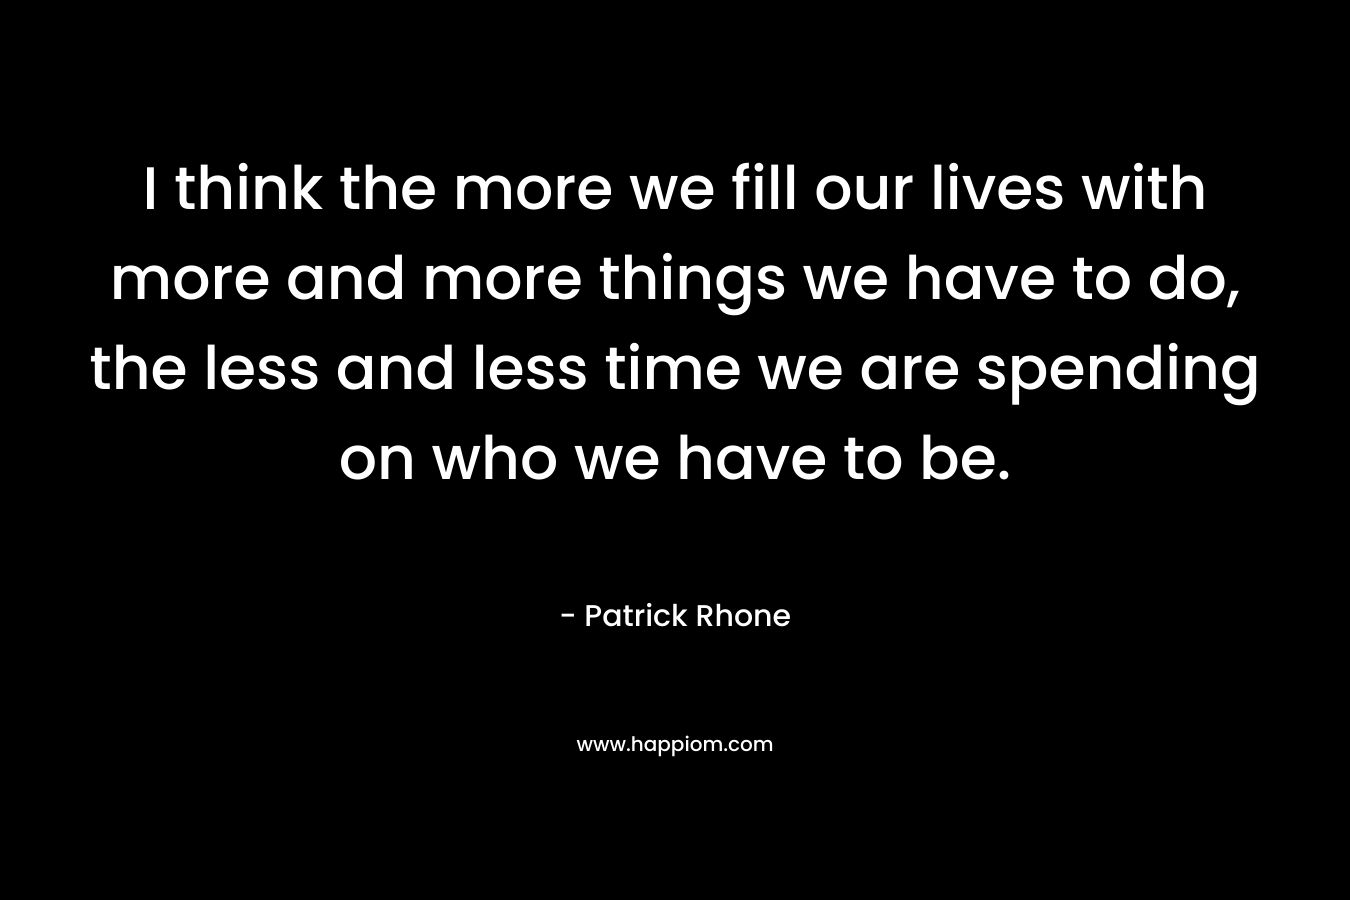 I think the more we fill our lives with more and more things we have to do, the less and less time we are spending on who we have to be. – Patrick Rhone